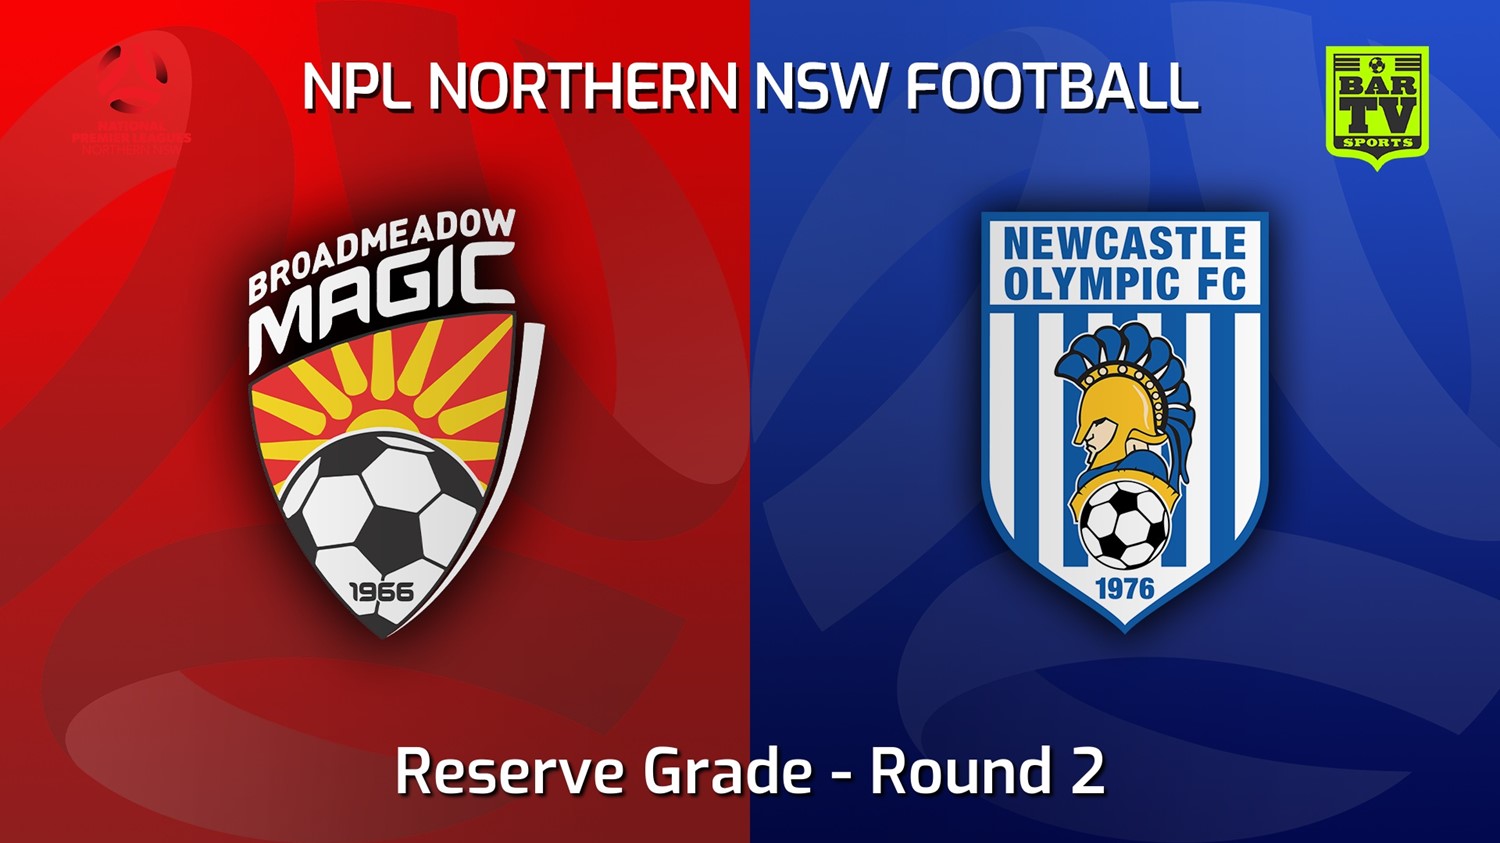 220313-NNSW NPL Res Round 2 - Broadmeadow Magic Res v Newcastle Olympic Res Minigame Slate Image